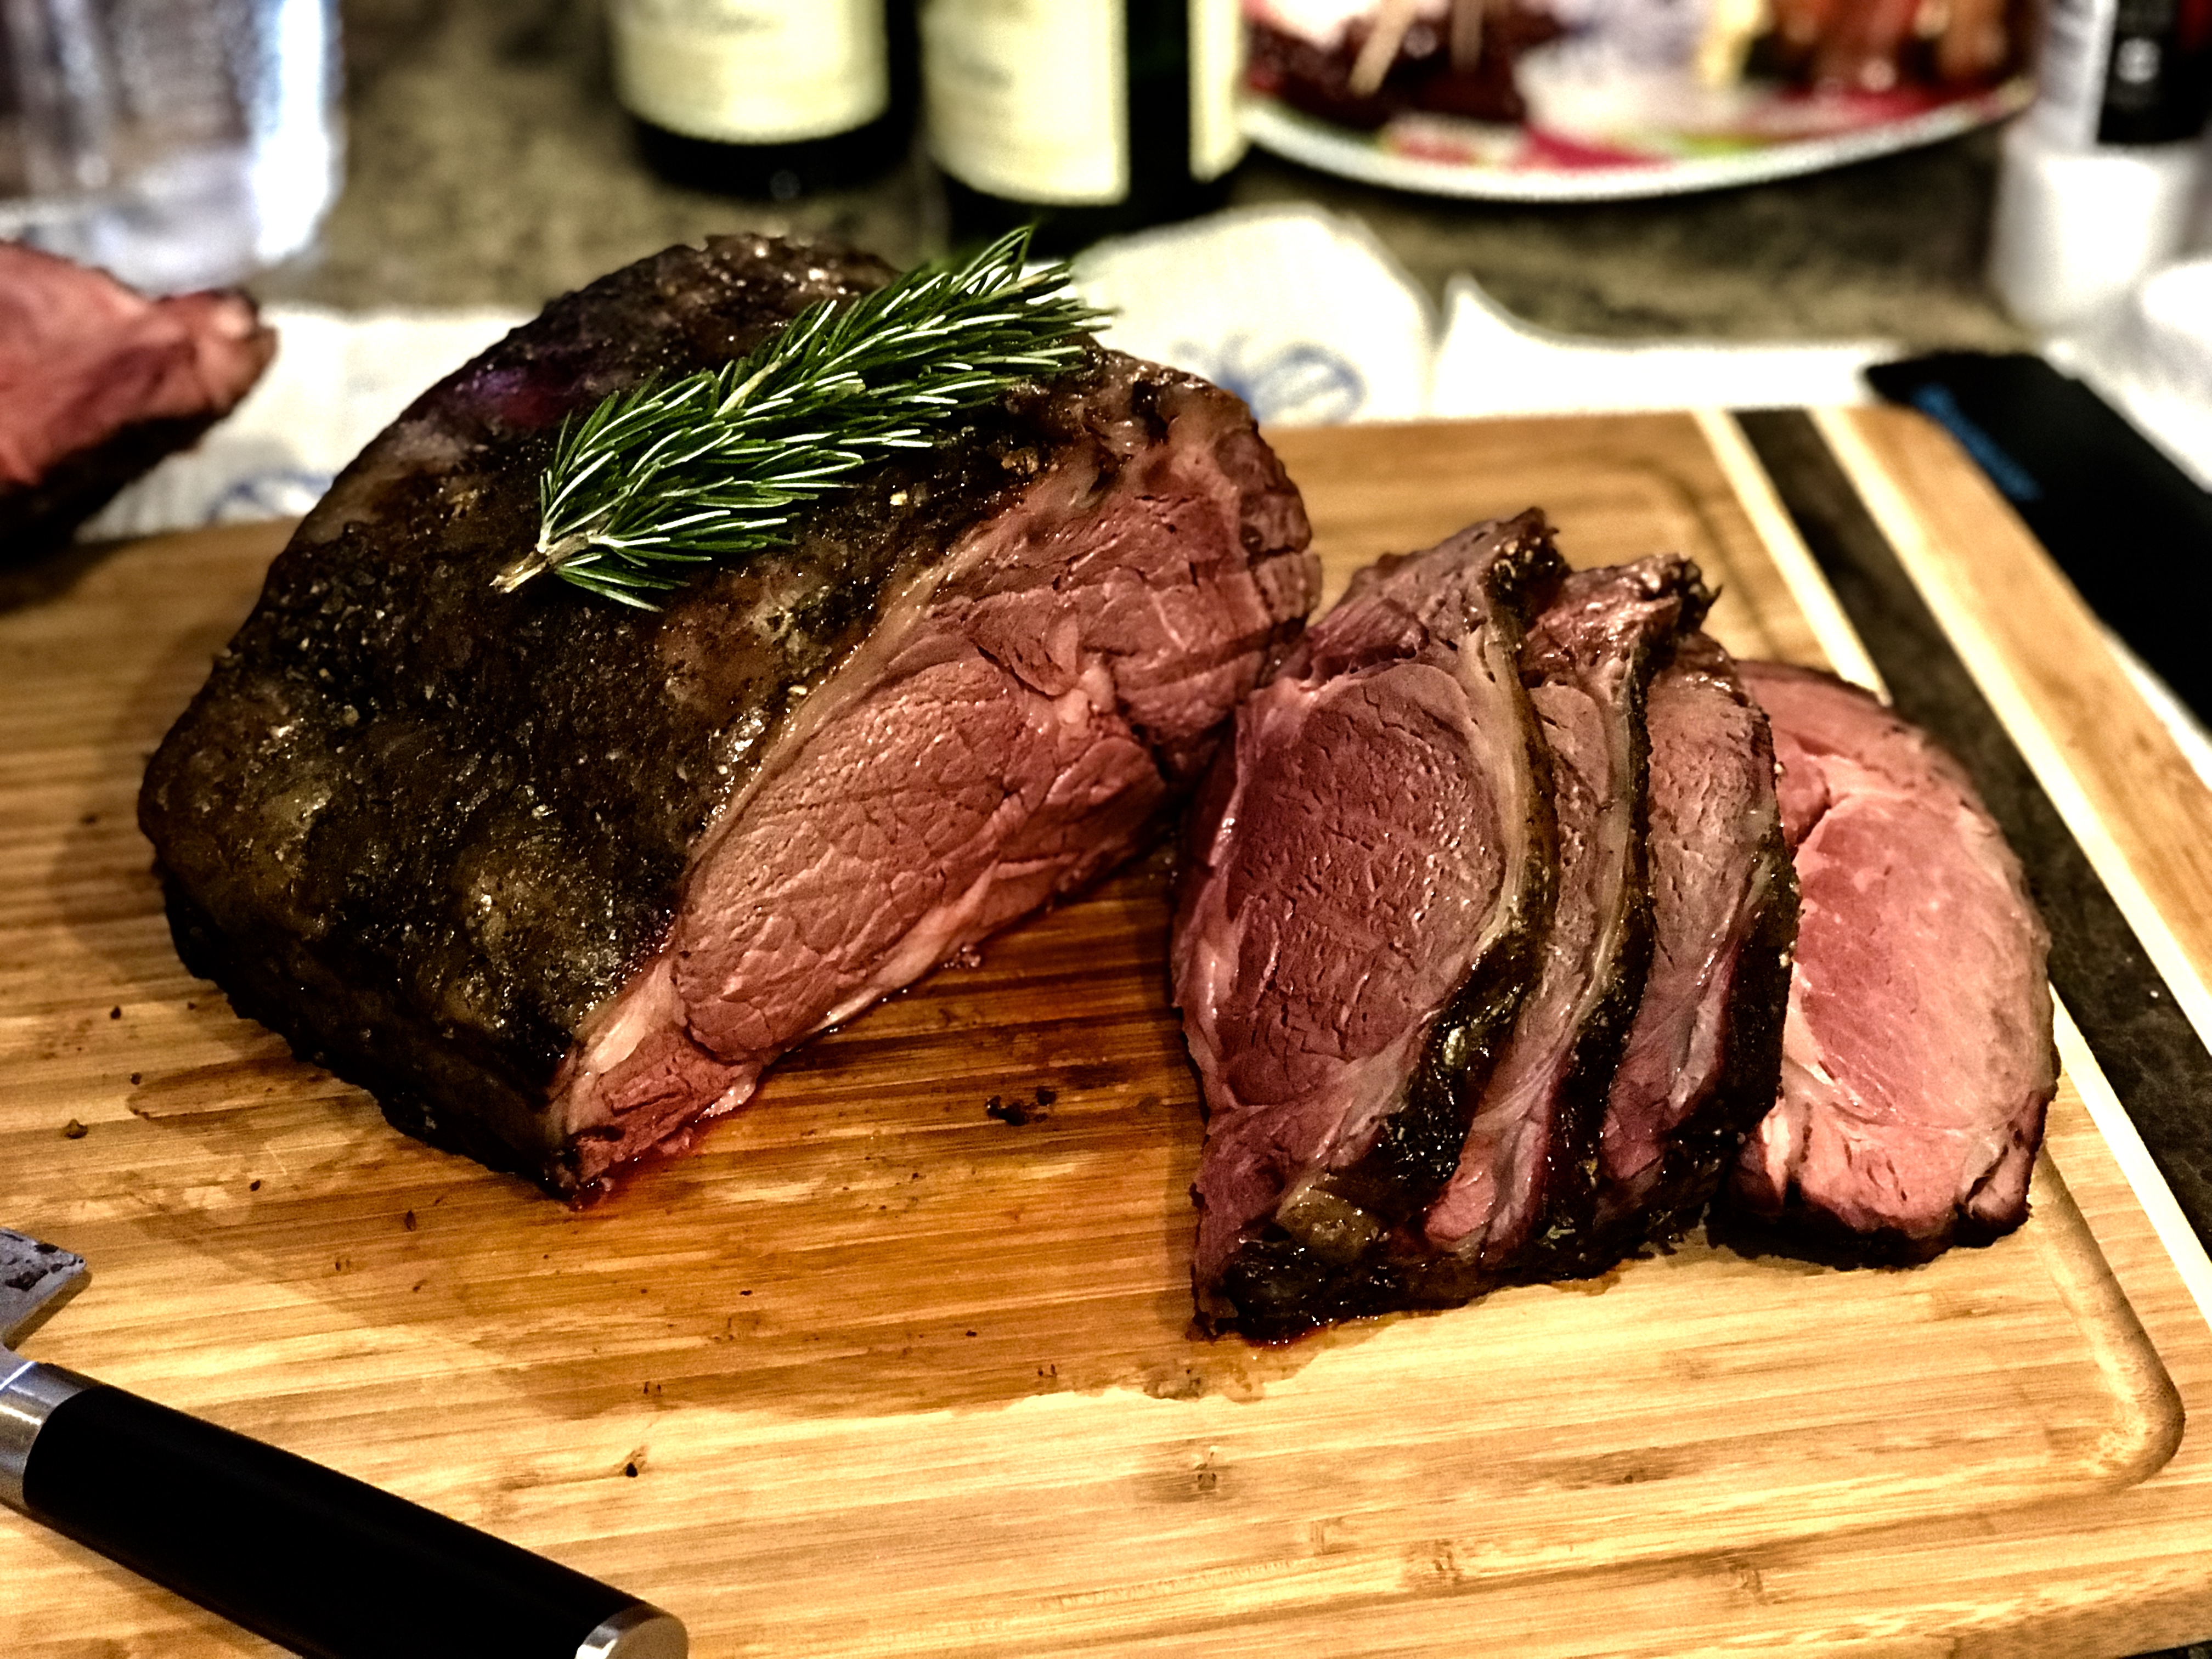 Herb Butter Smoked Prime Rib Your Go To Prime Rib Recipe Slowpoke Cooking,Double Die Penny